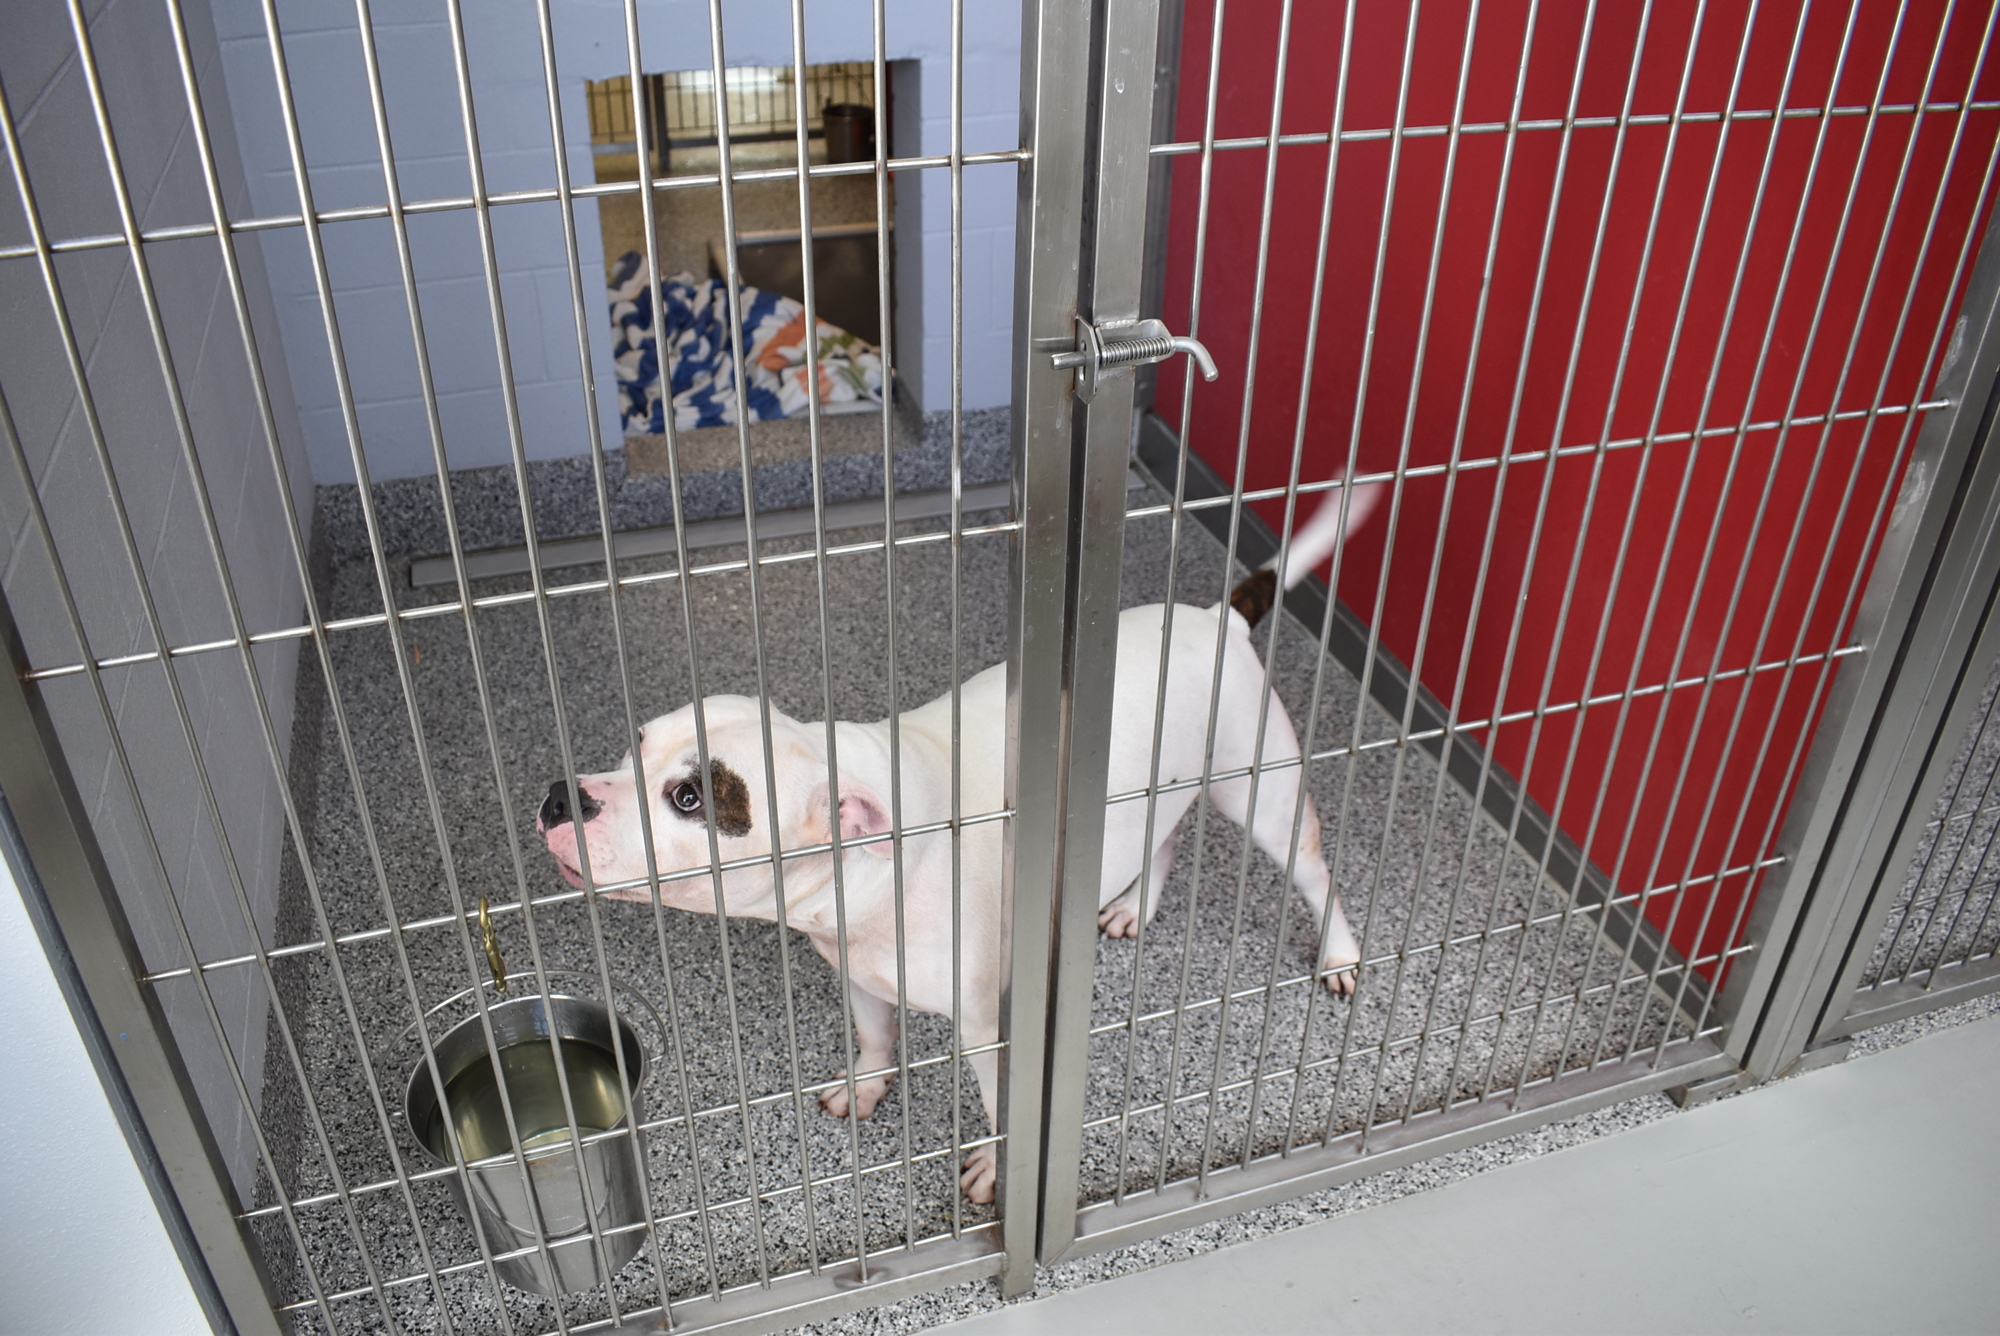 Dogs inside the Bishop Animal Shelter have cages that feature indoor/outdoor access and automatic drainage. Neither option is currently available for dogs in Palmetto.